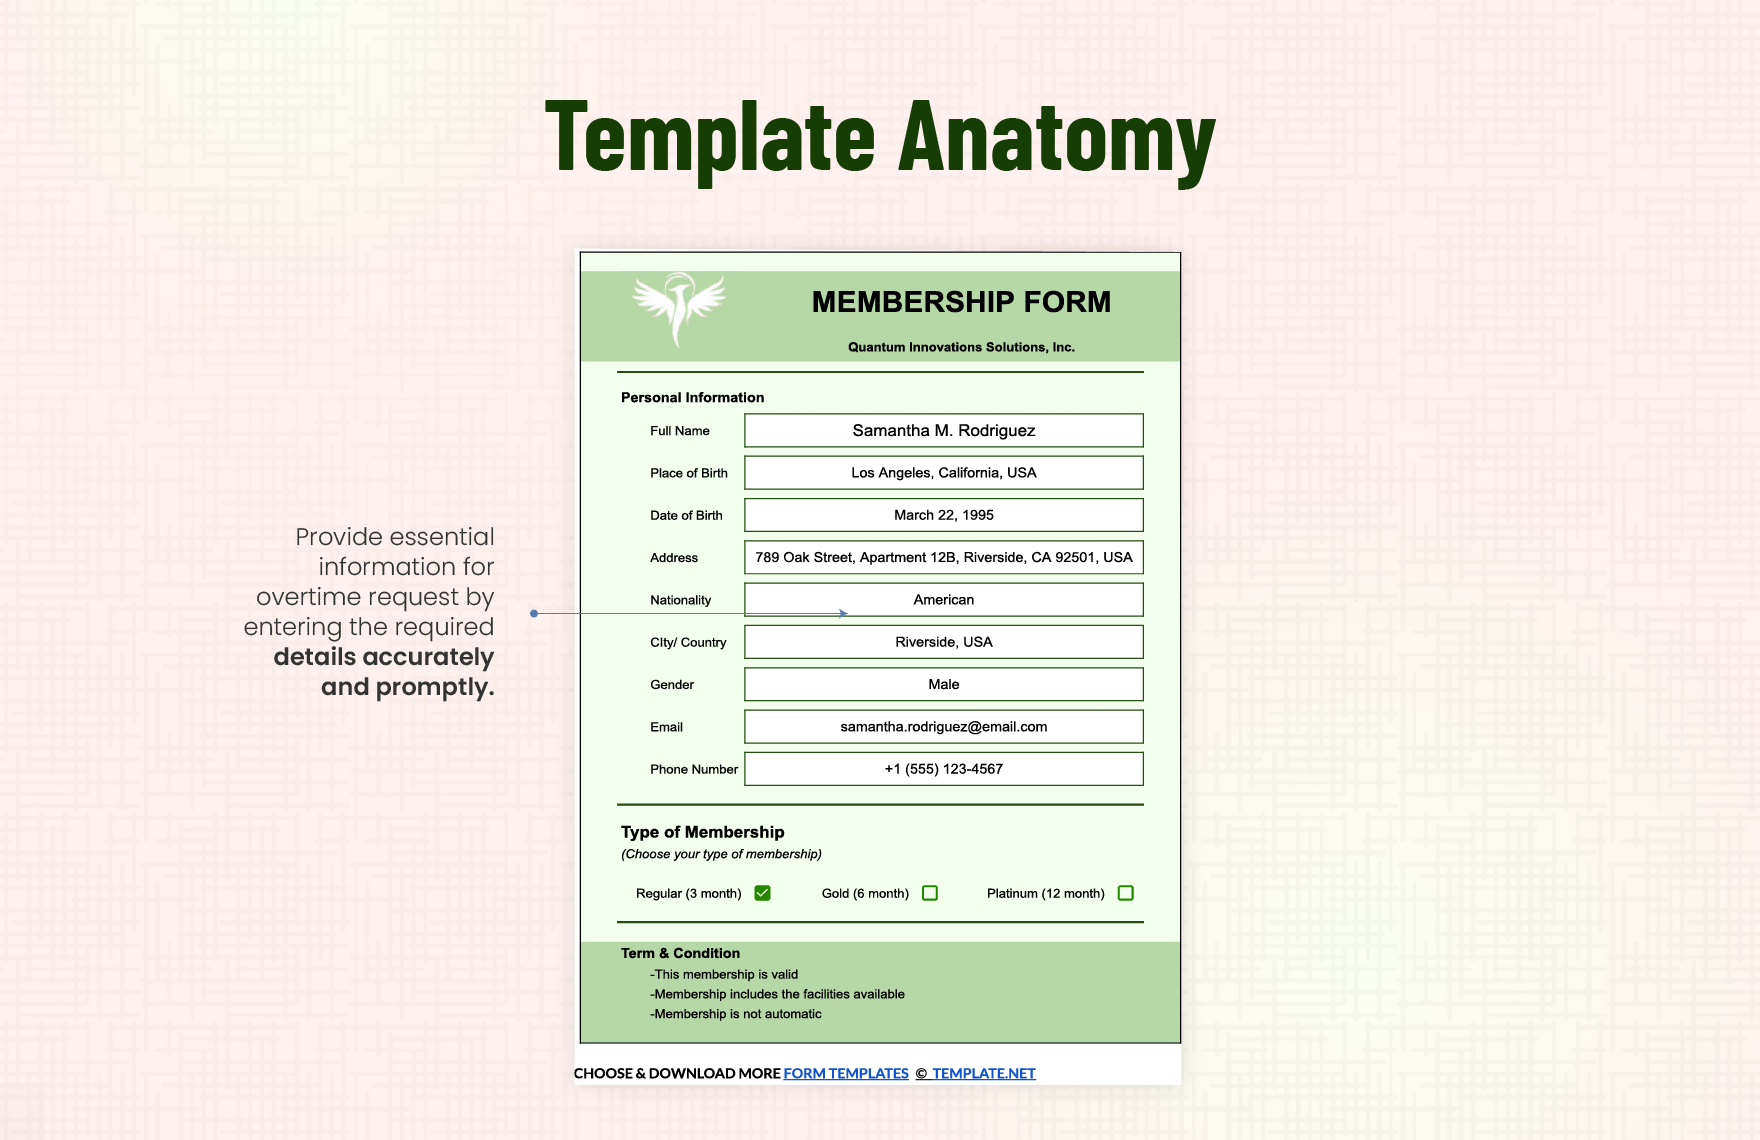 Form Template